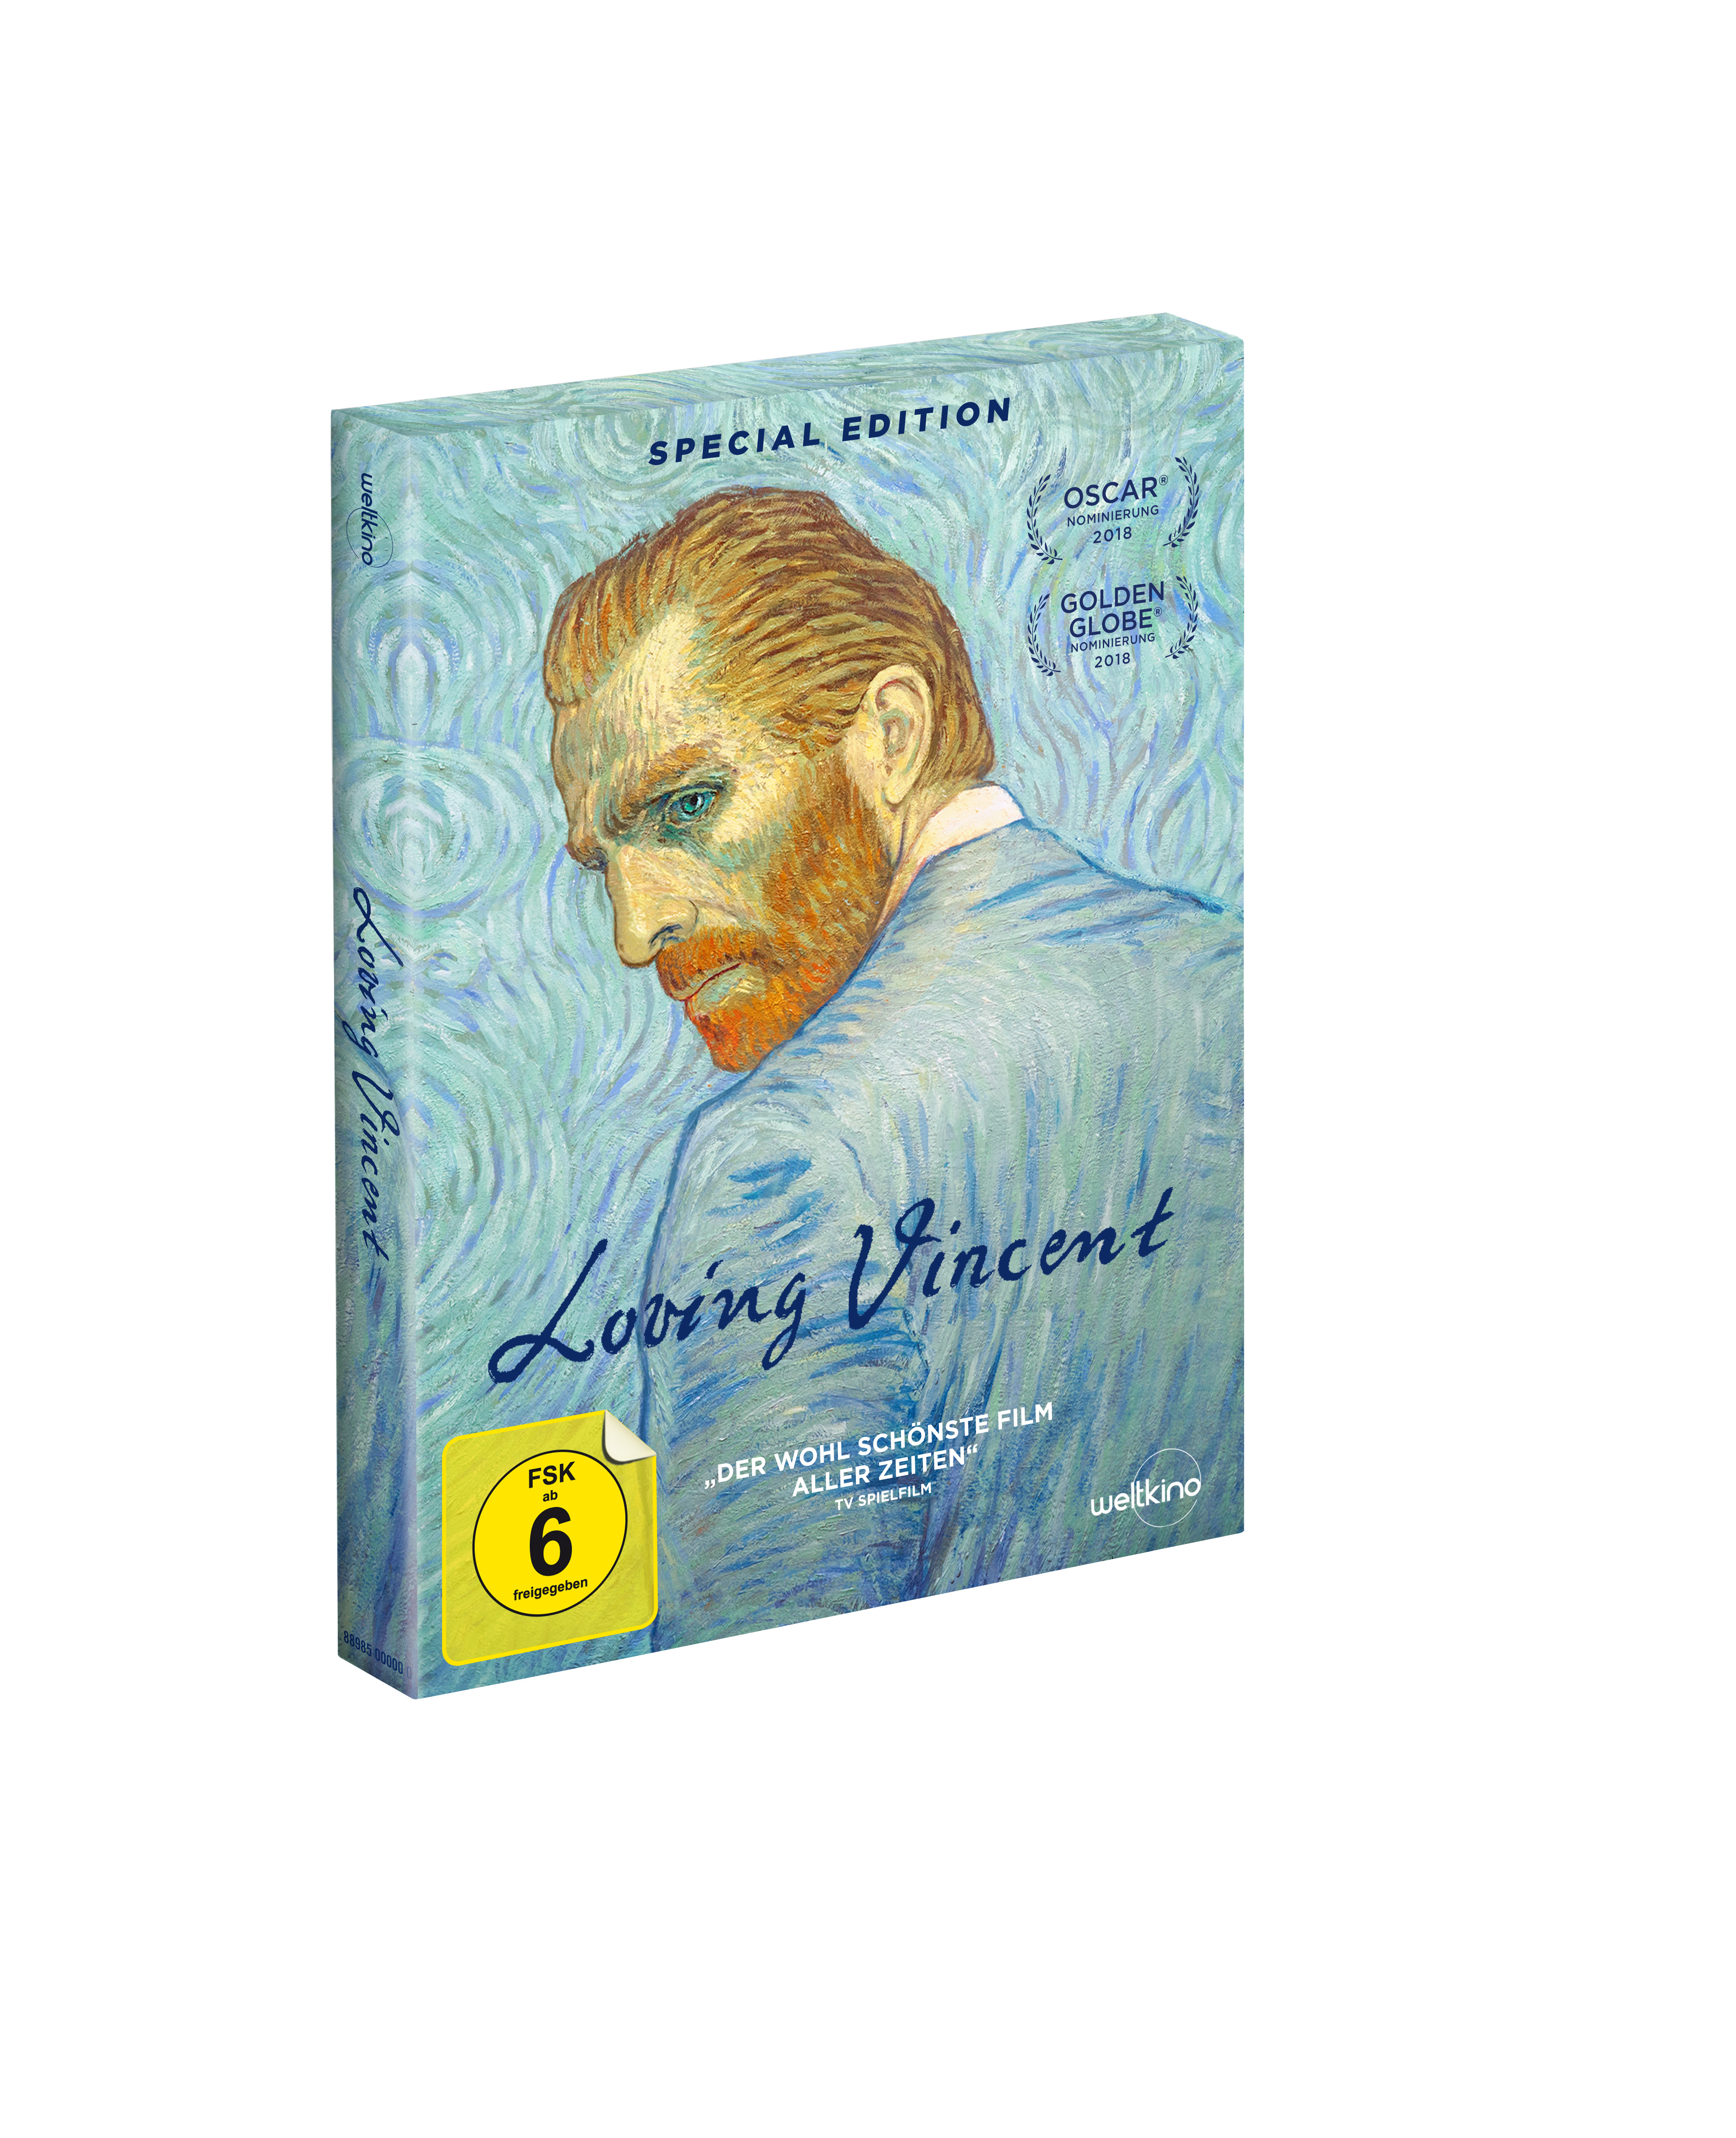 Loving Vincent (Limited CD + DVD Special Edition)